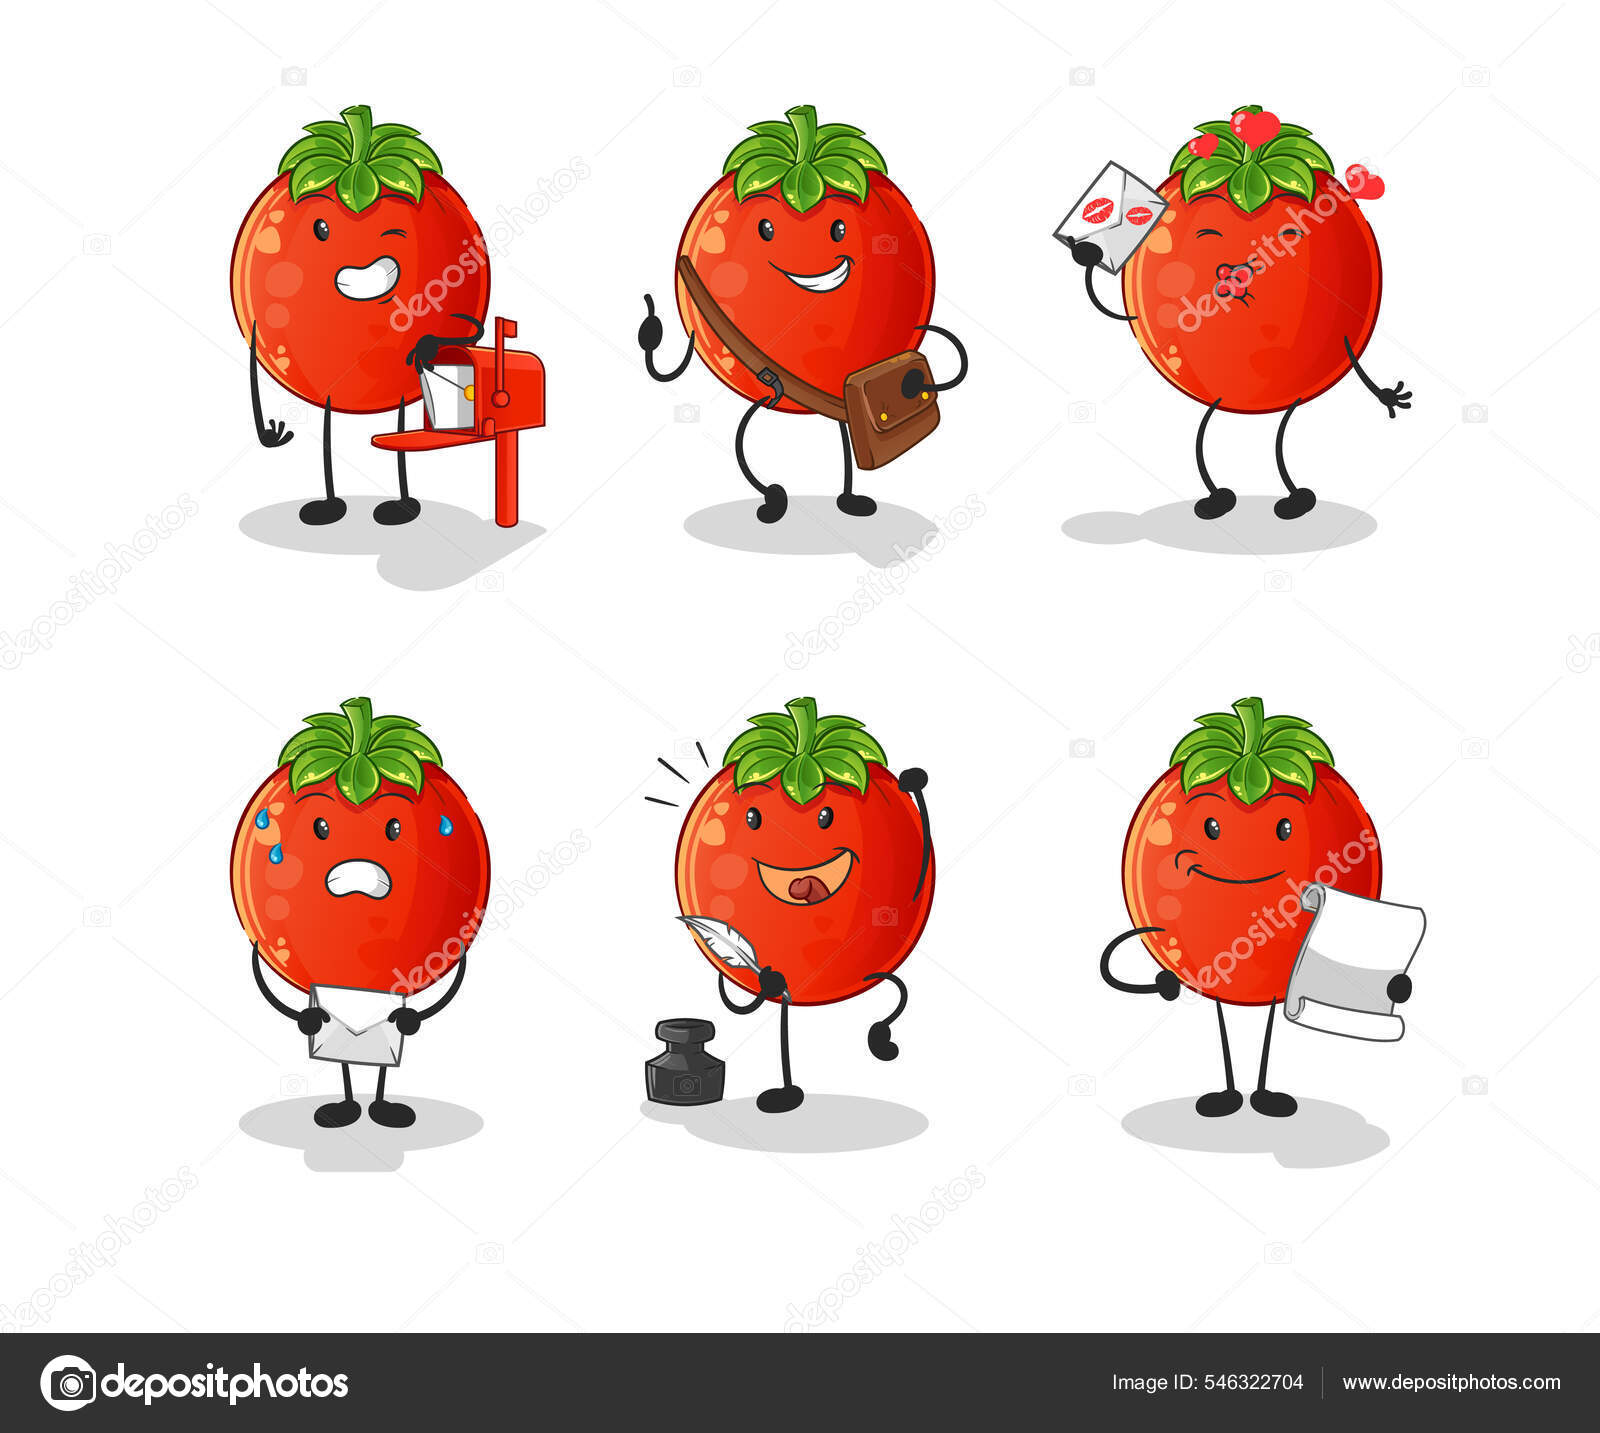 Tomato plant clipart Vector Art Stock Images - Page 3 | Depositphotos